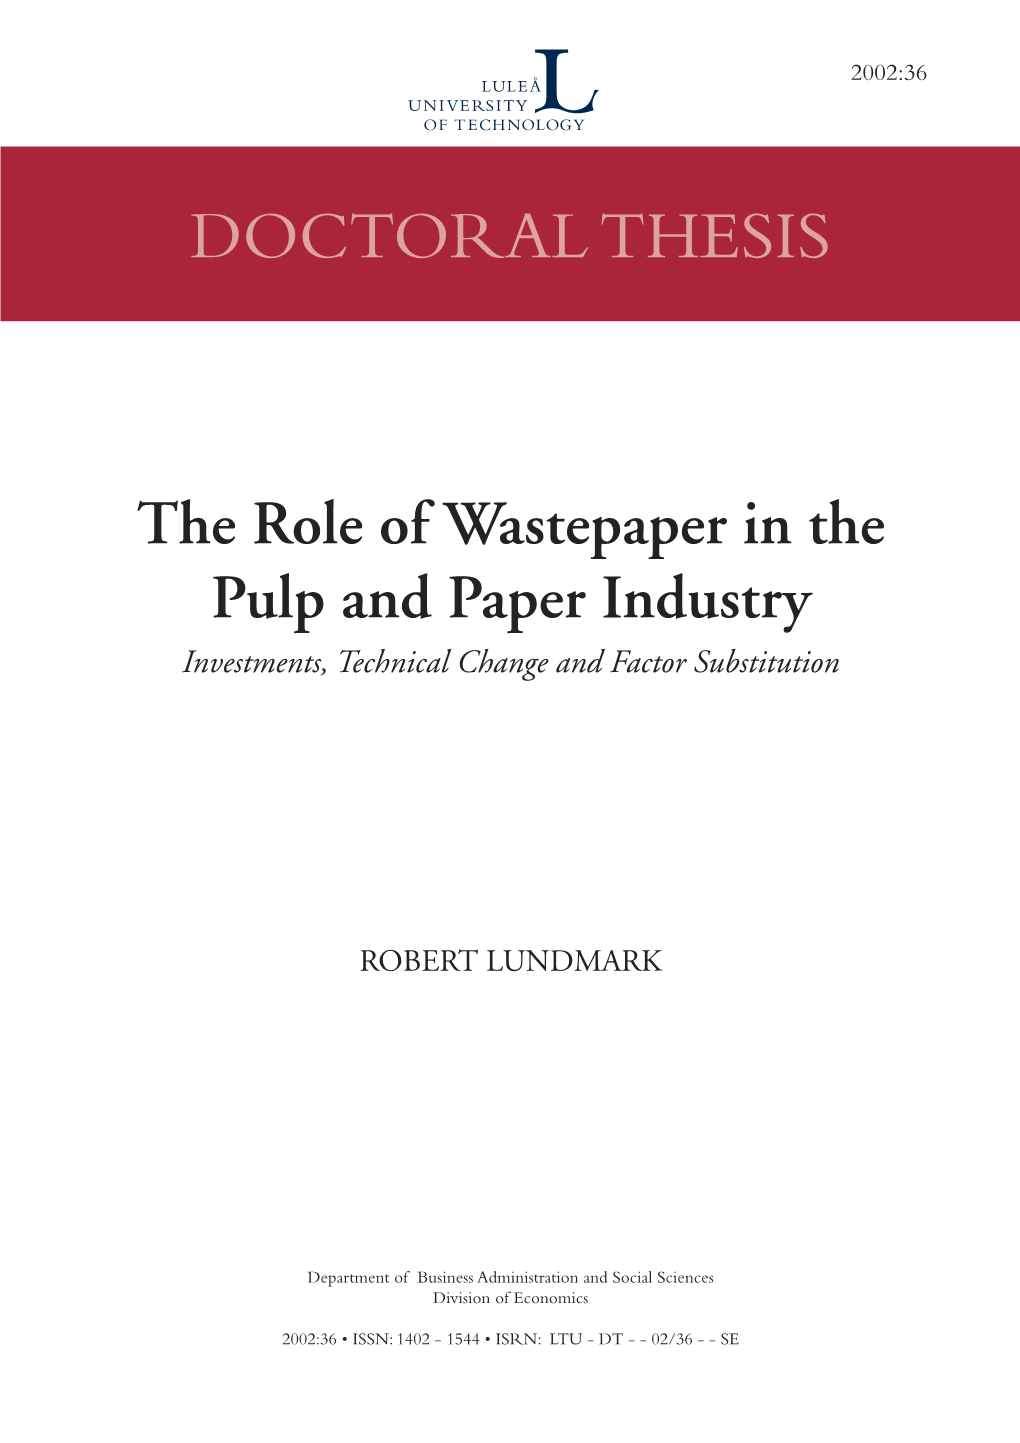 The Role of Wastepaper in the Pulp and Paper Industry Investments, Technical Change and Factor Substitution